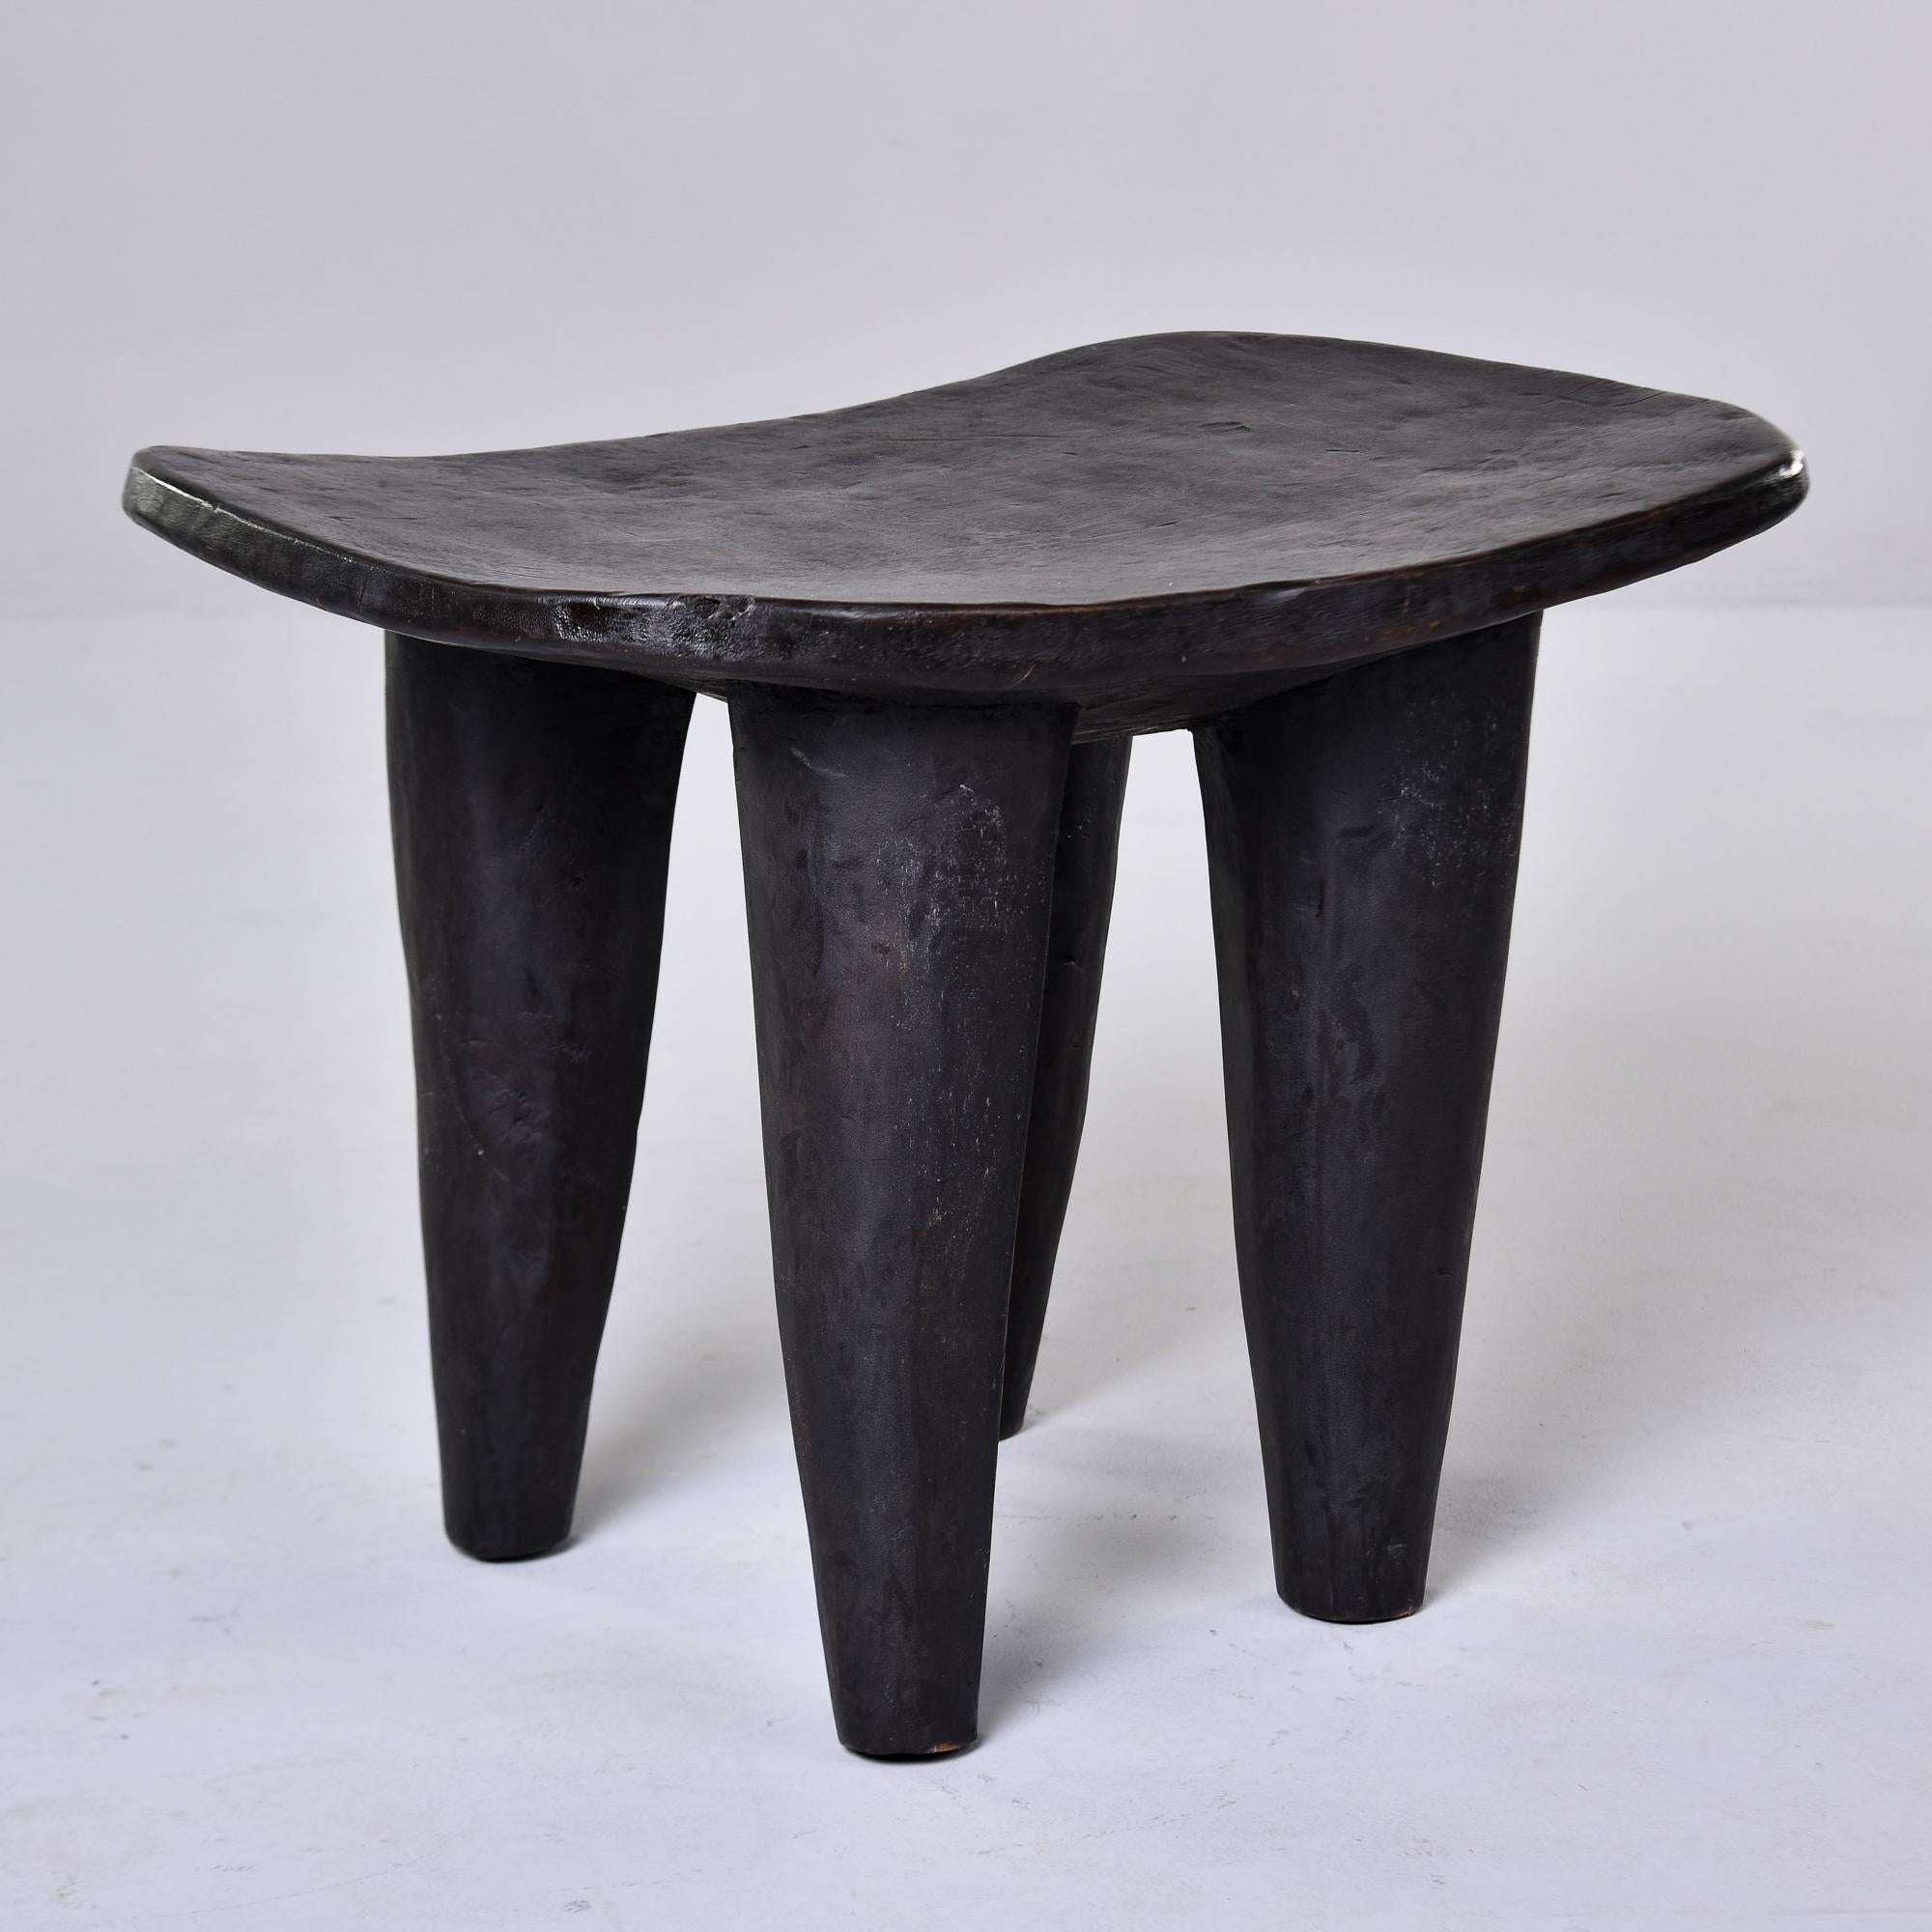 This circa 1980s stool or side table is just under wide. It is hand carved from a single piece of wood with thick, tapered legs by the Senufo people of Cote d’Ivoire. Very distinct and versatile;  this can be used as a stool, ottoman or accent